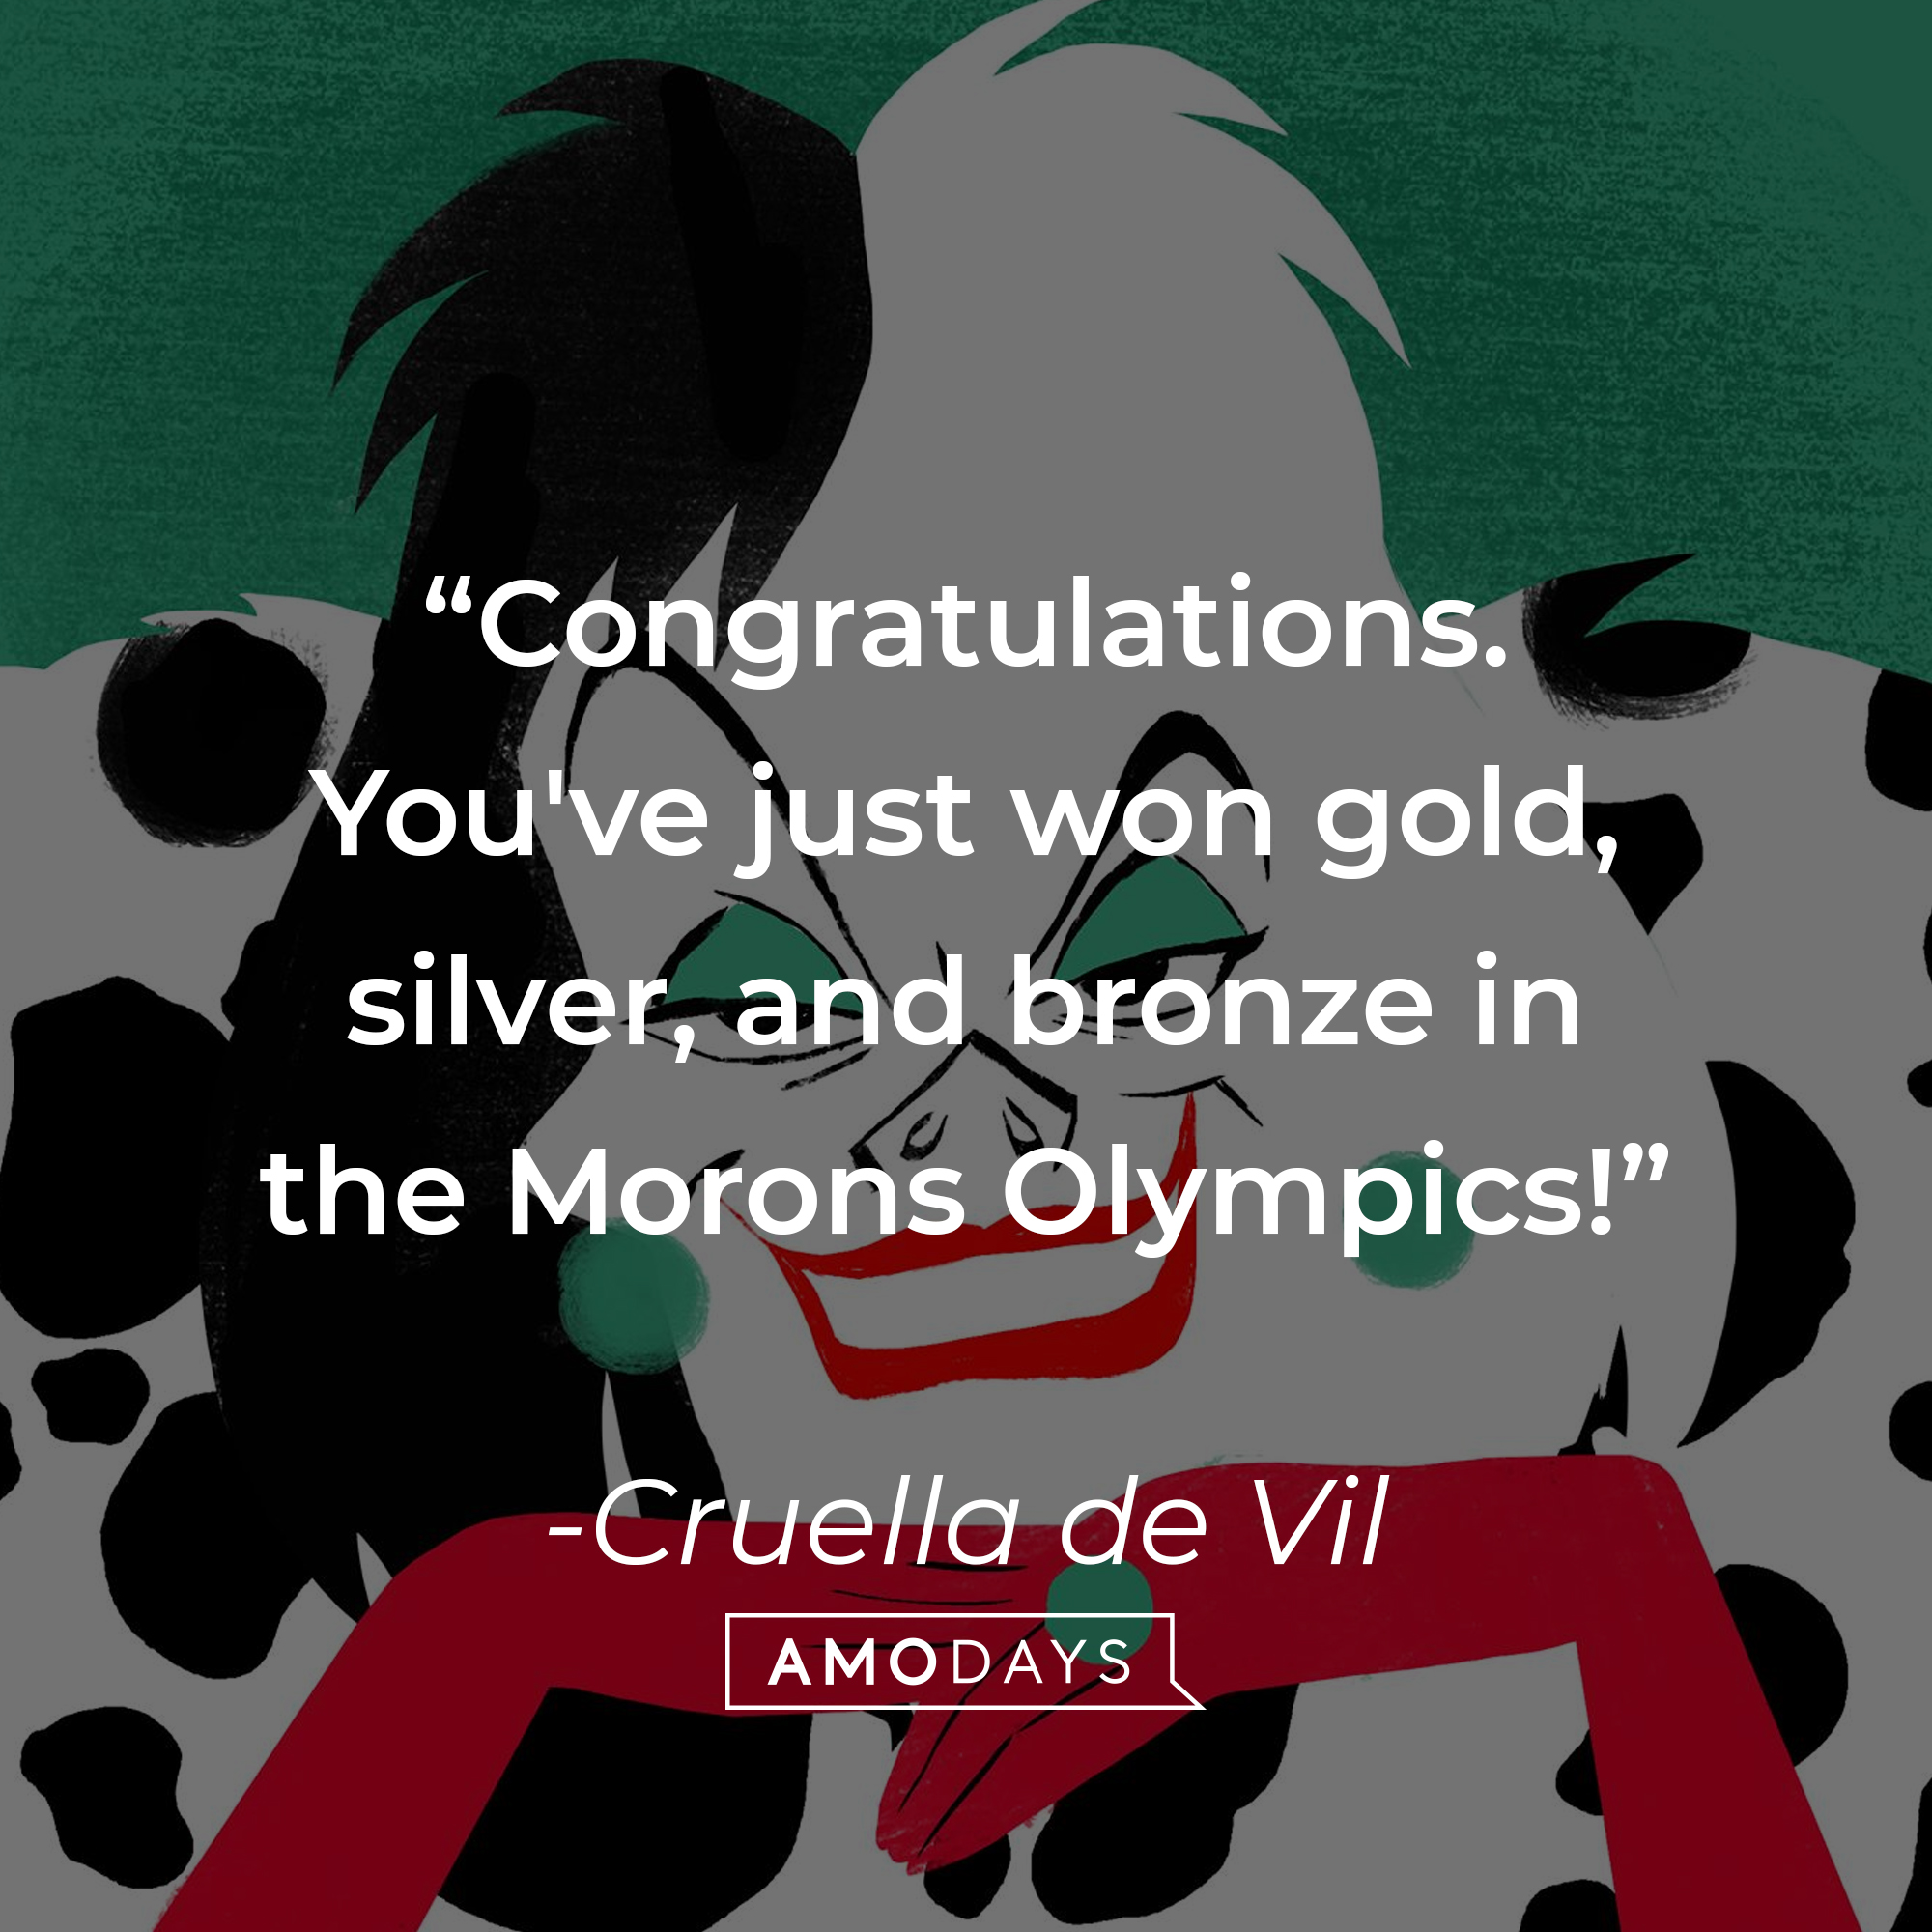 An image of the animated Cruella de Vil, with a quote from the same adapted character in the 1996 film “101 Dalmatians”: “Congratulations. You've just won gold, silver, and bronze in the Morons Olympics!” | Source: Facebook.com/DisneyCruellaDeVil